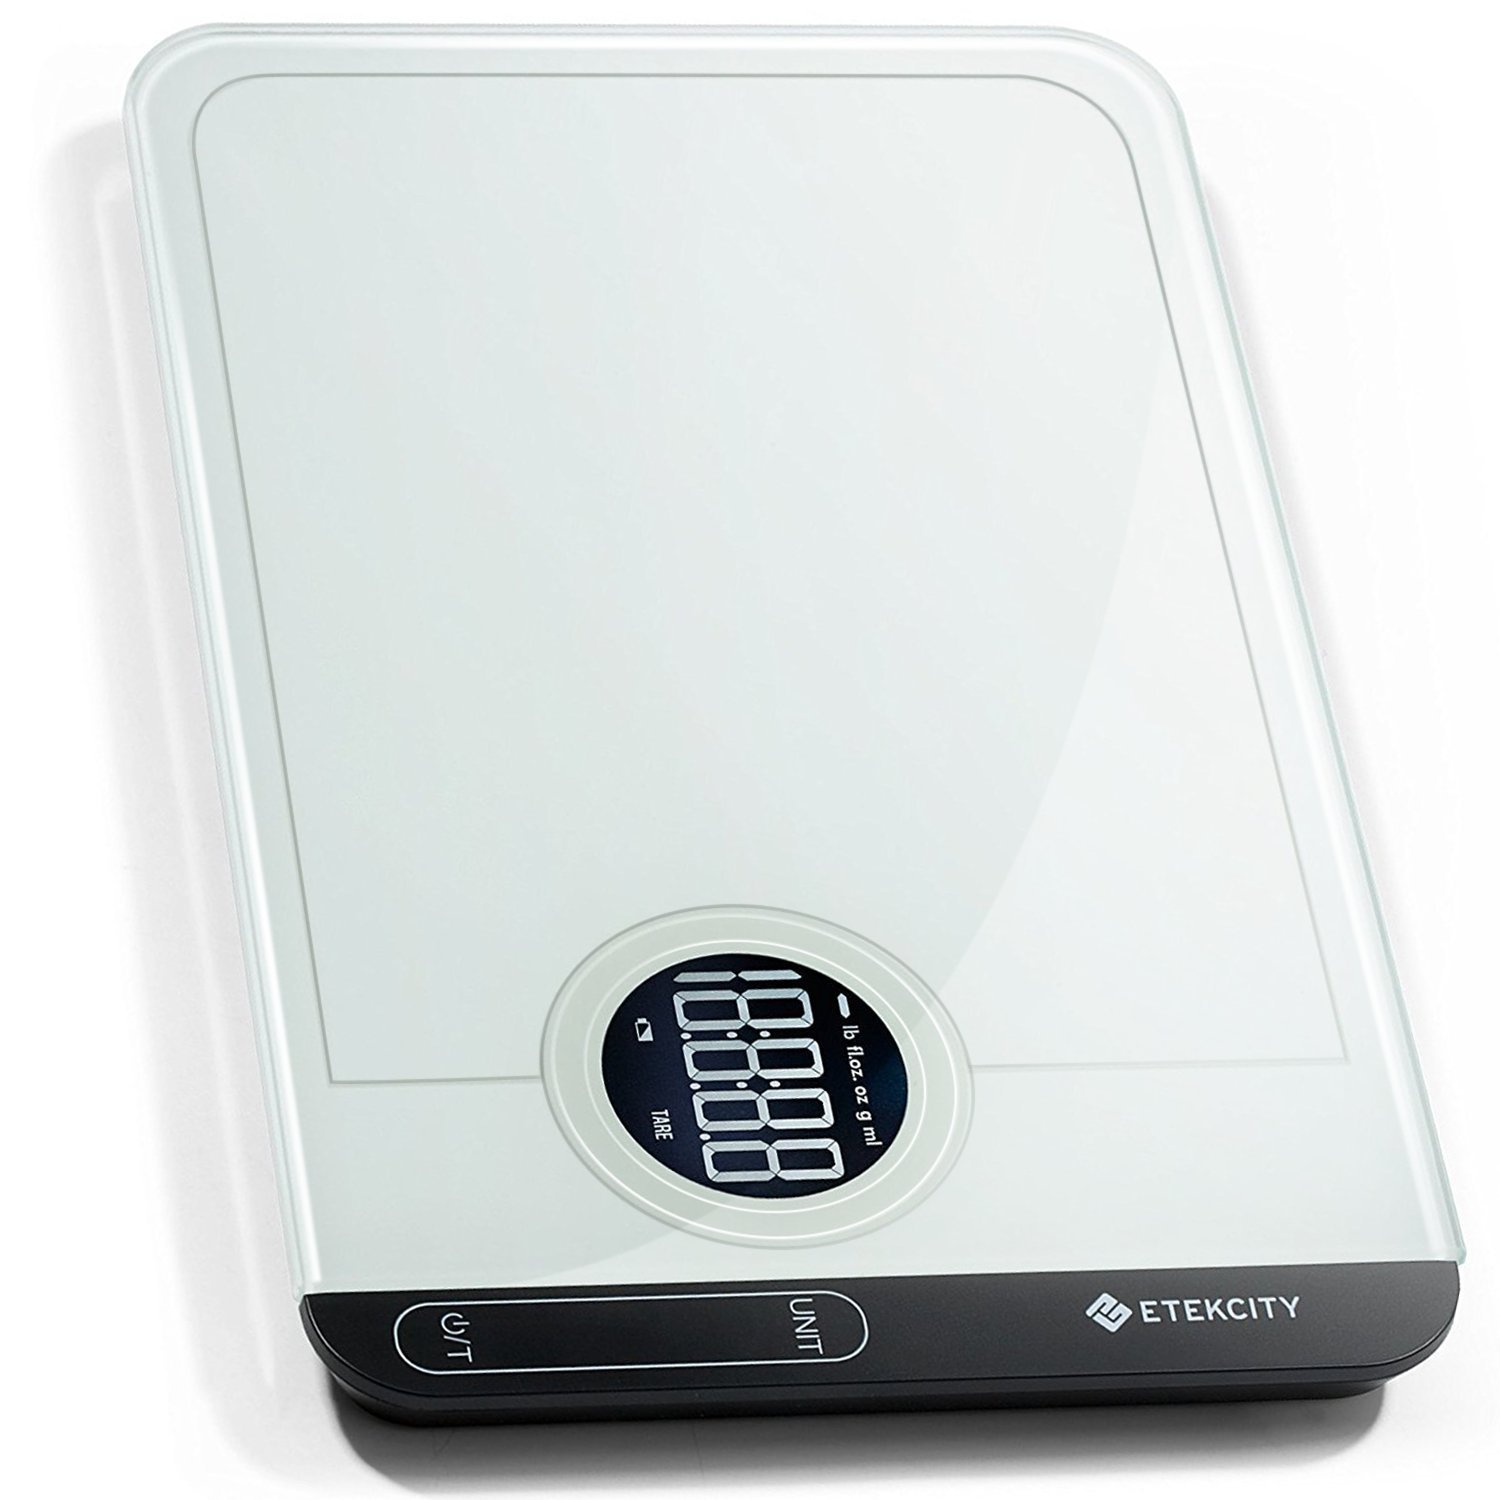 Etekcity Food Kitchen Scale, Digital Grams and Oz for Cooking, Baking, Weight Loss, Meal Prep, Shipping, and Dieting, 11lb/5kg, White